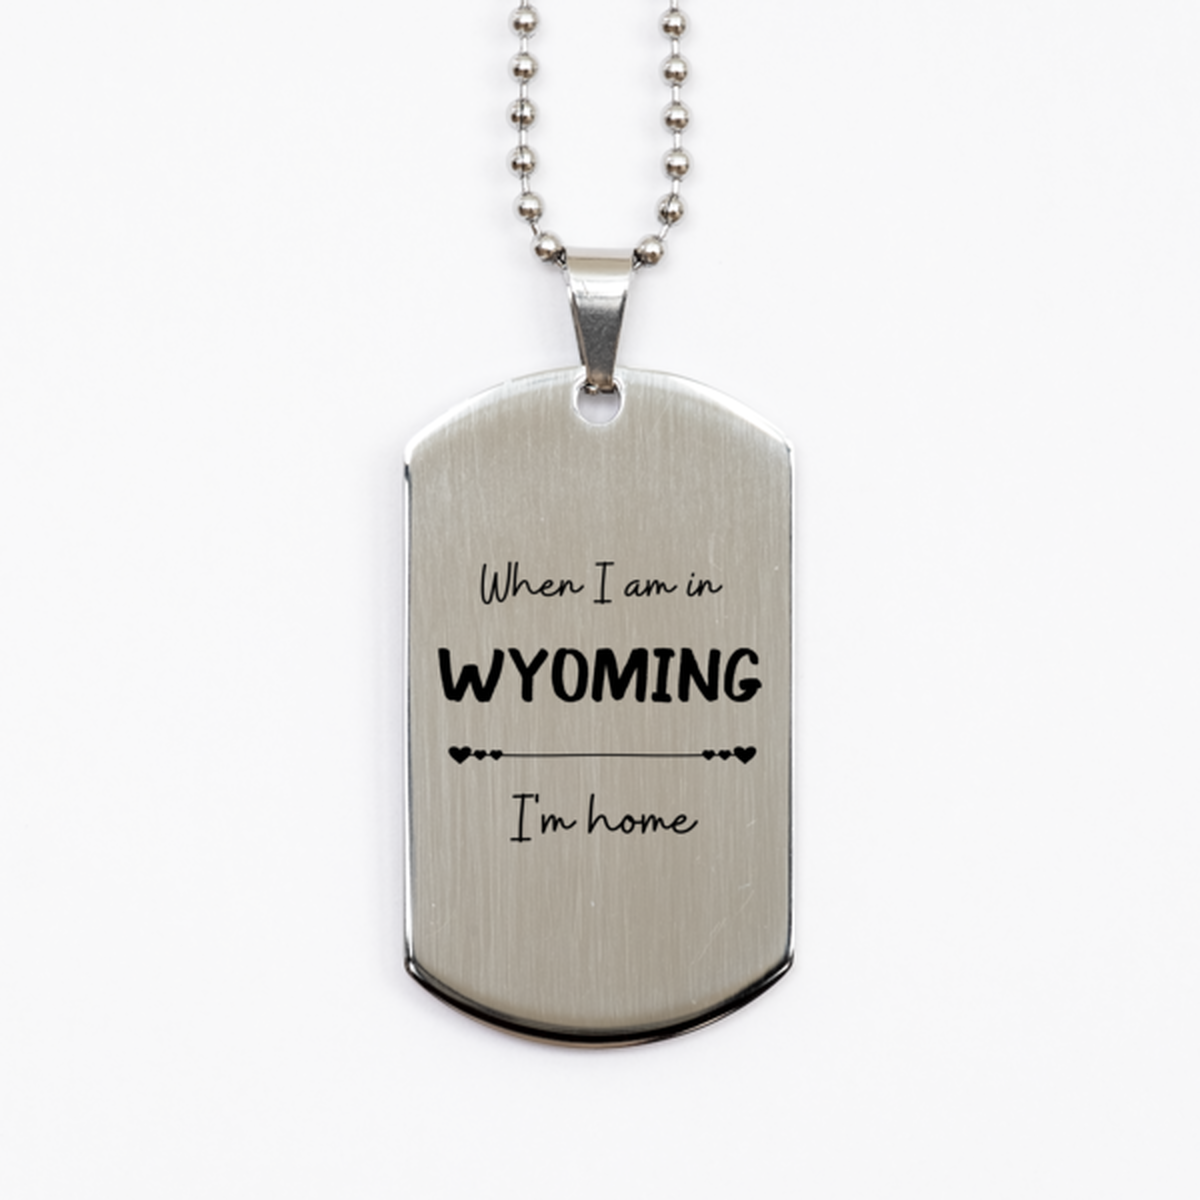 When I am in Wyoming I'm home Silver Dog Tag, Cheap Gifts For Wyoming, State Wyoming Birthday Gifts for Friends Coworker